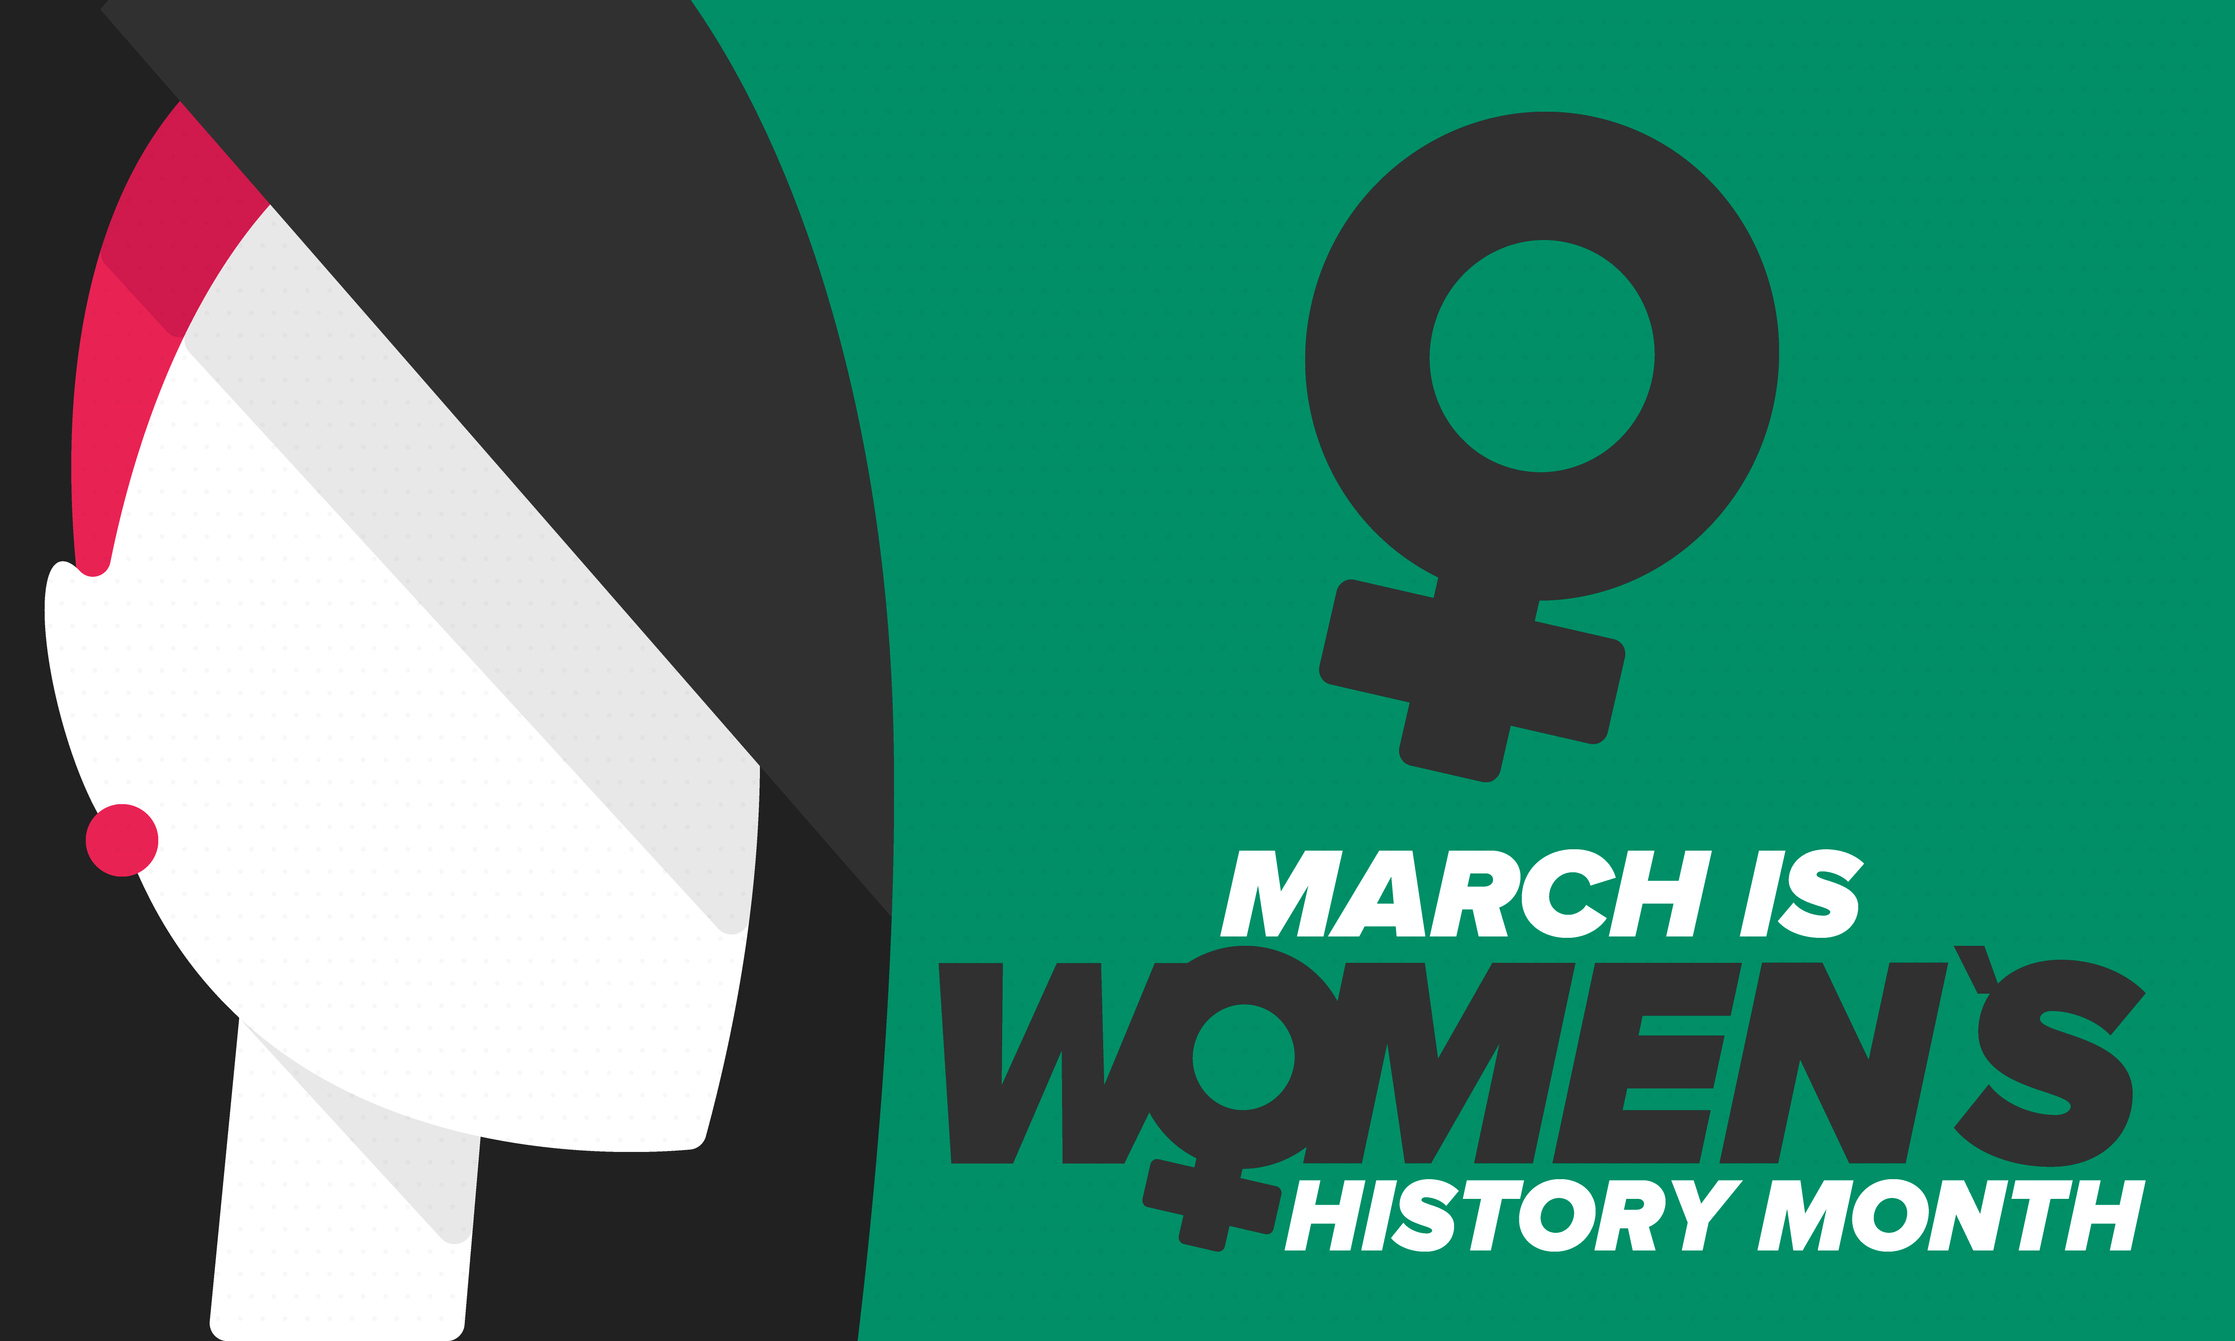 Part Two: Staff Reflections in Honor of Women’s History Month